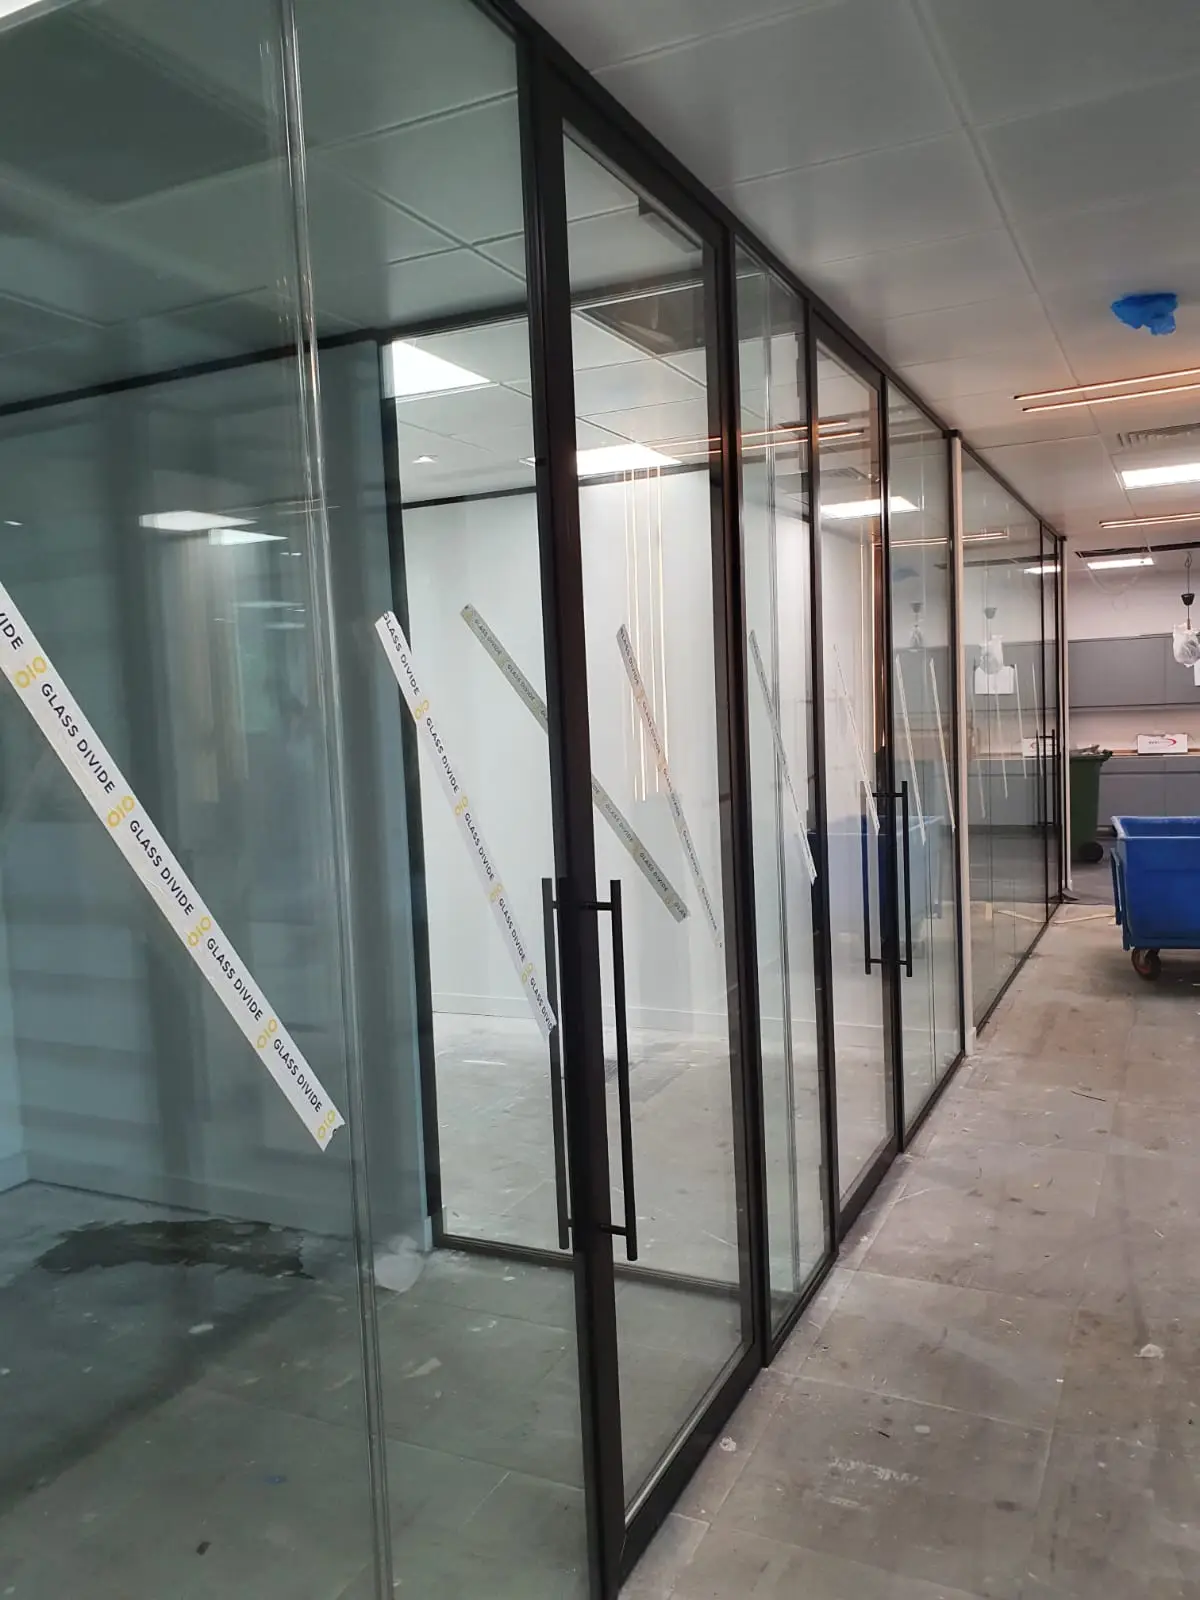 Office space partitions with double glazed with double glazes doors